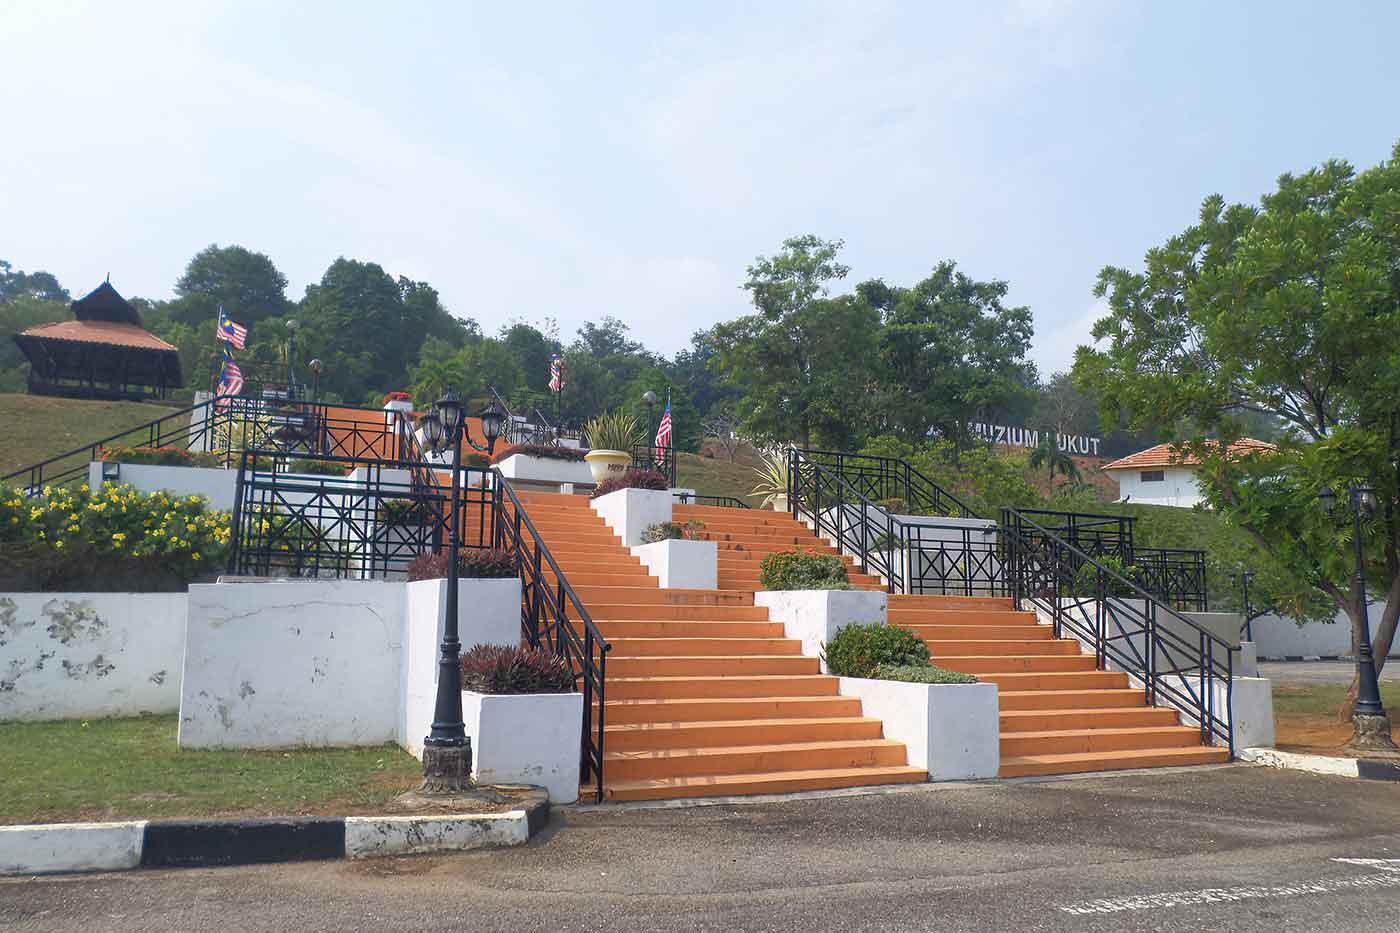 Lukut Fort and Museum